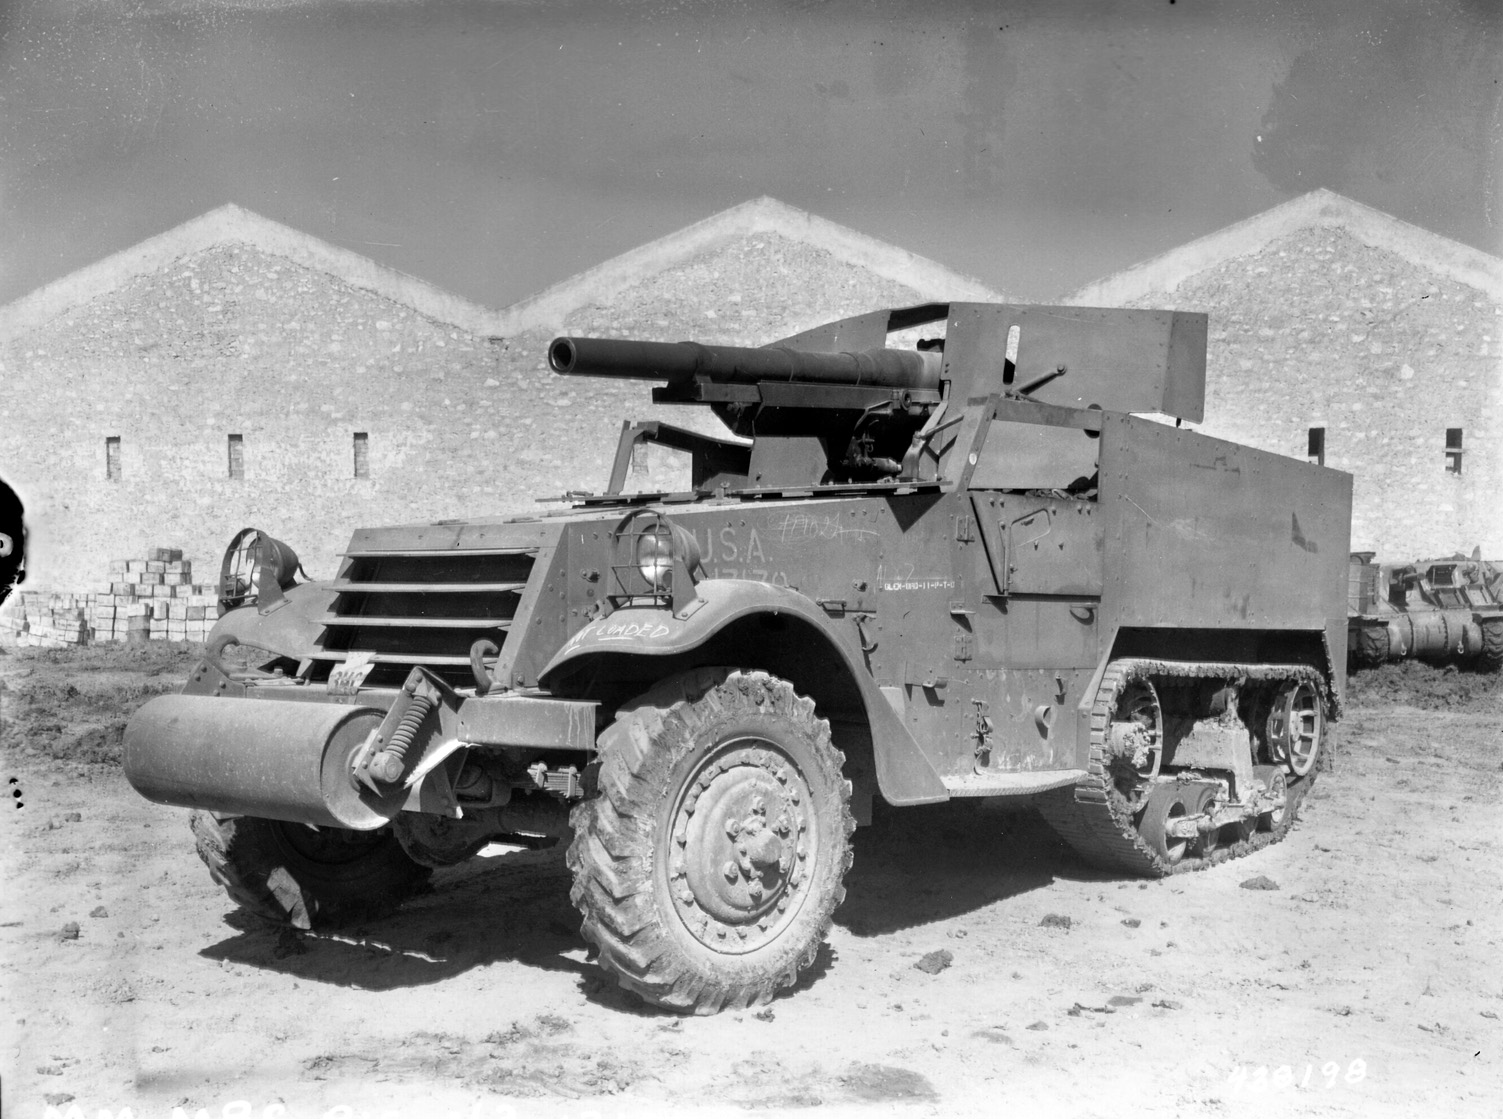 Early in the war, the U.S. Army relied heavily on M3 halftracks armed with 75mm cannon as tank destroyers. The vehicles had virtually no armor and were vulnerable to both enemy cannon and machine-gun fire. 